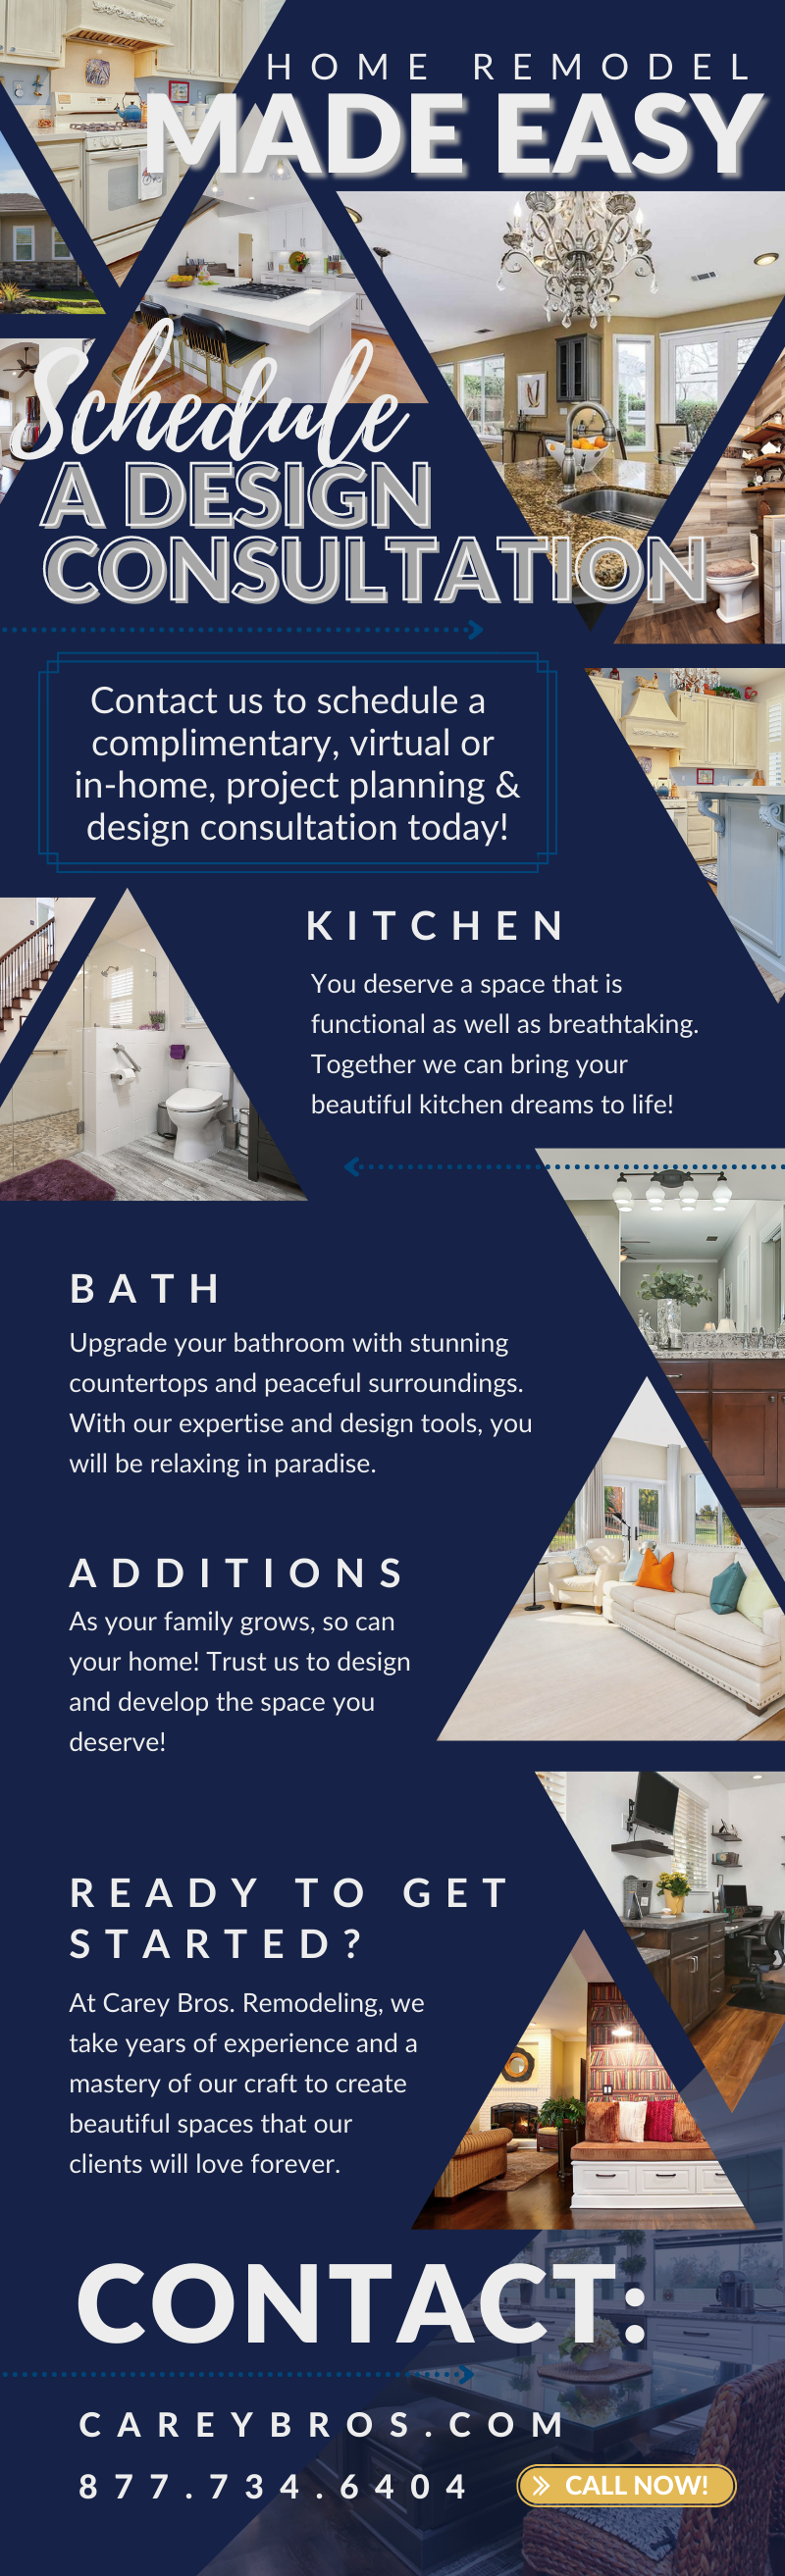 home remodel made easy infographic